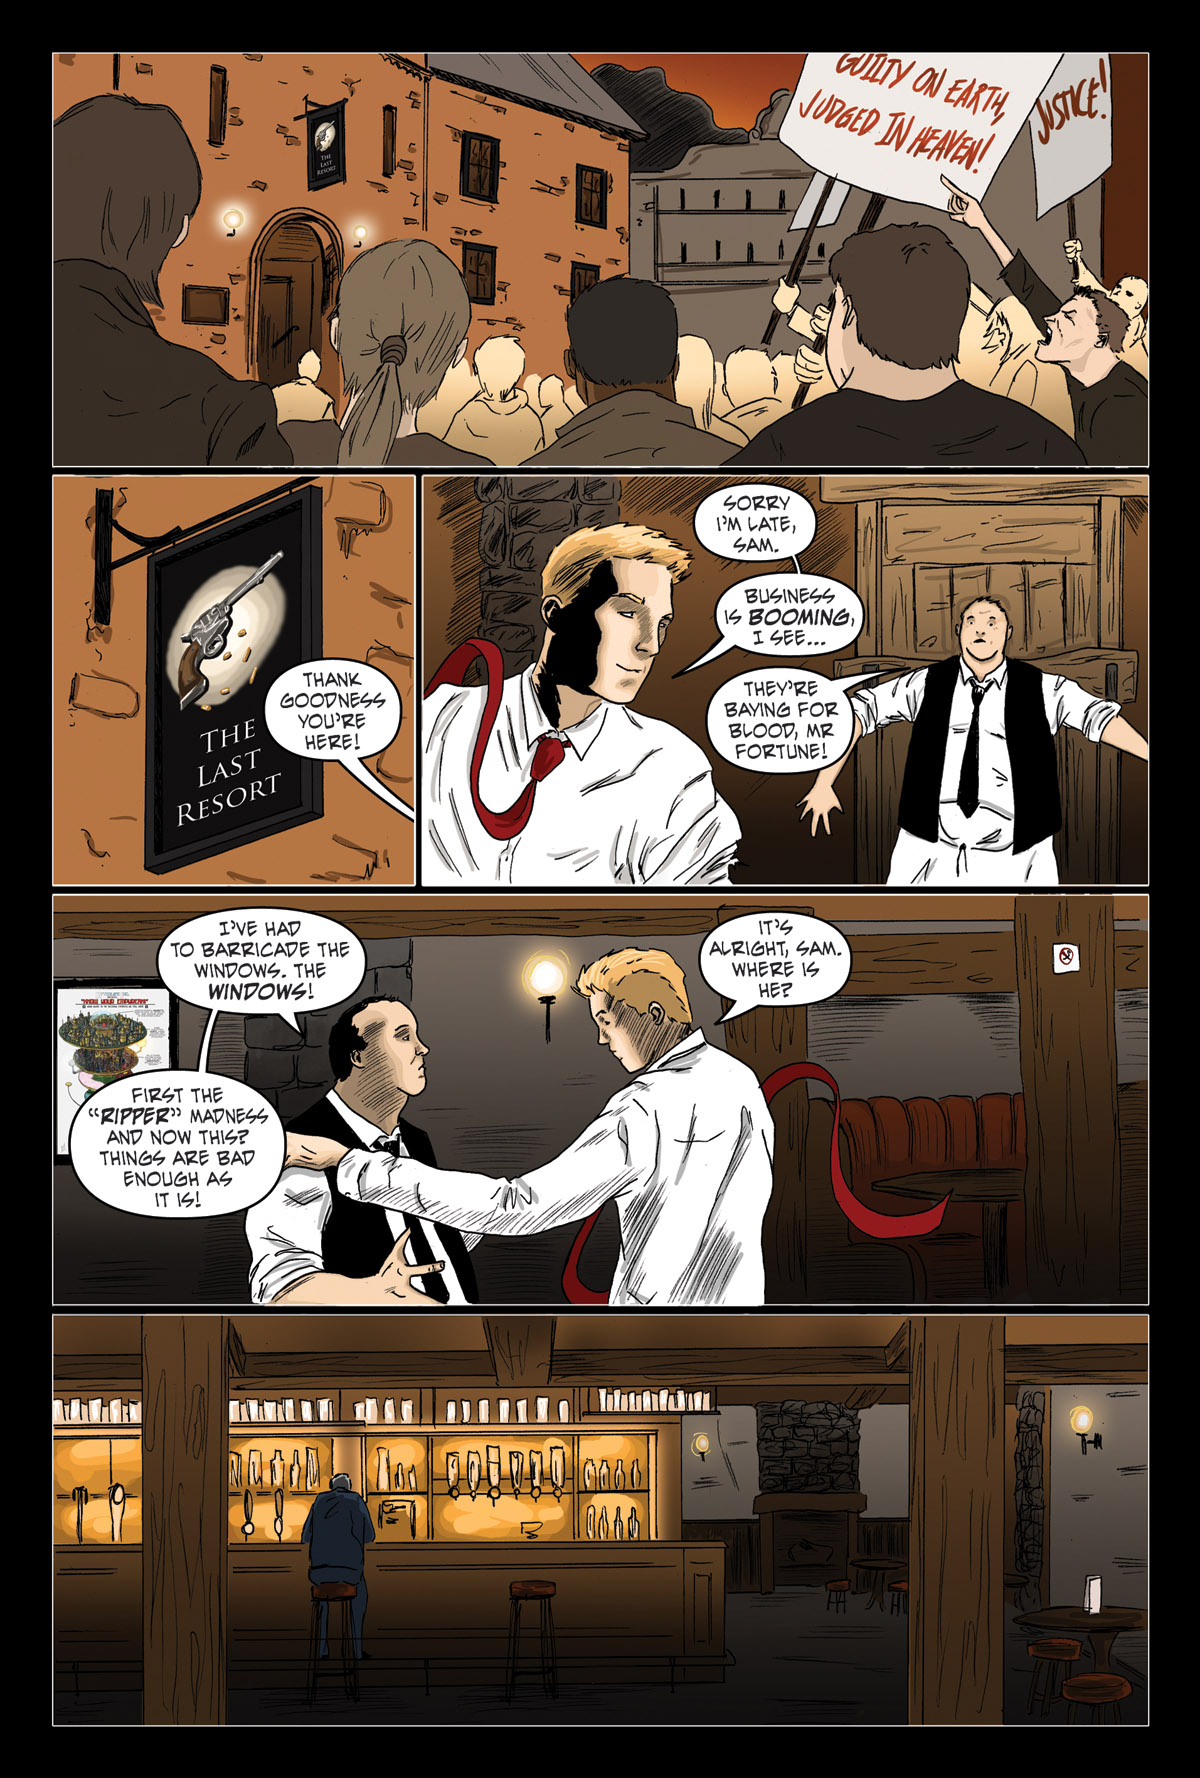 Afterlife Inc. | Death of a Salesman | Page 1